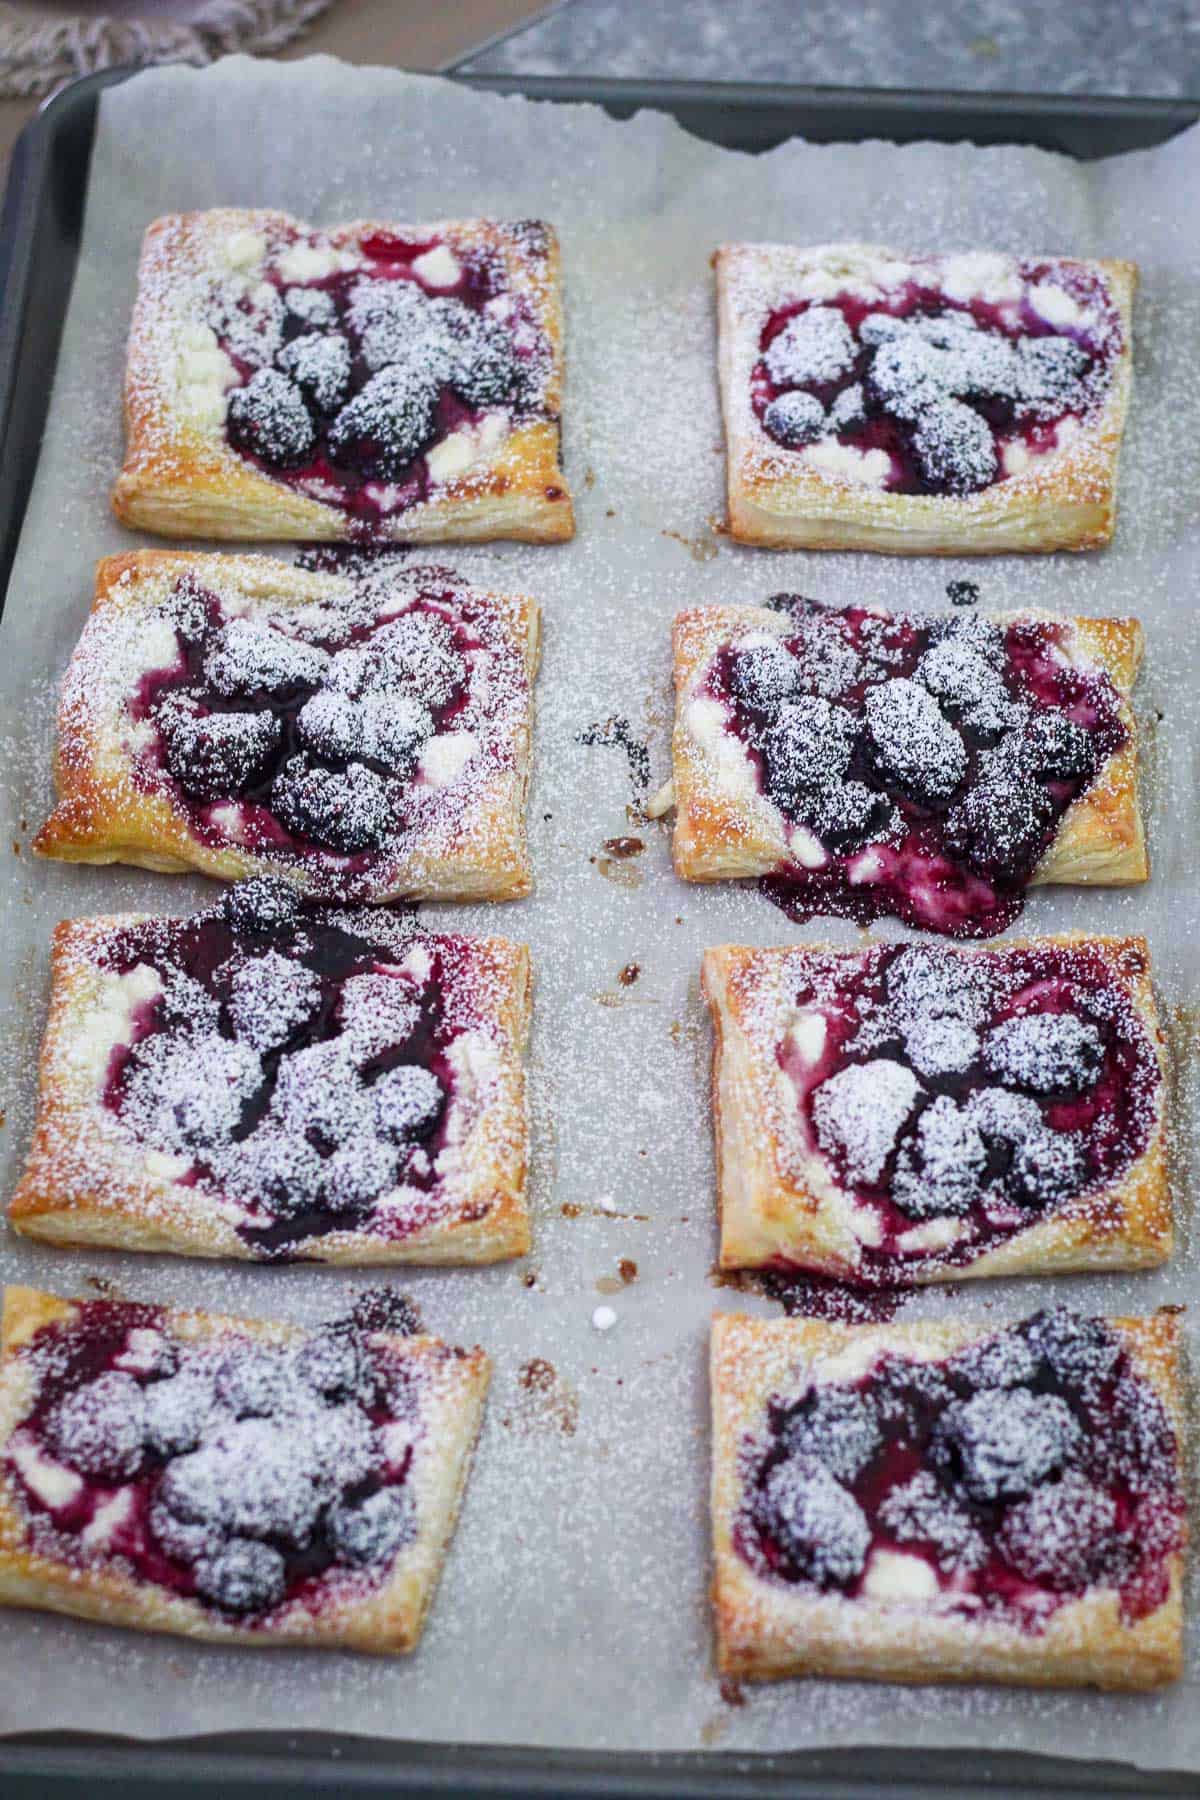 Tarts after baking, sprinkled with powdered sugar.